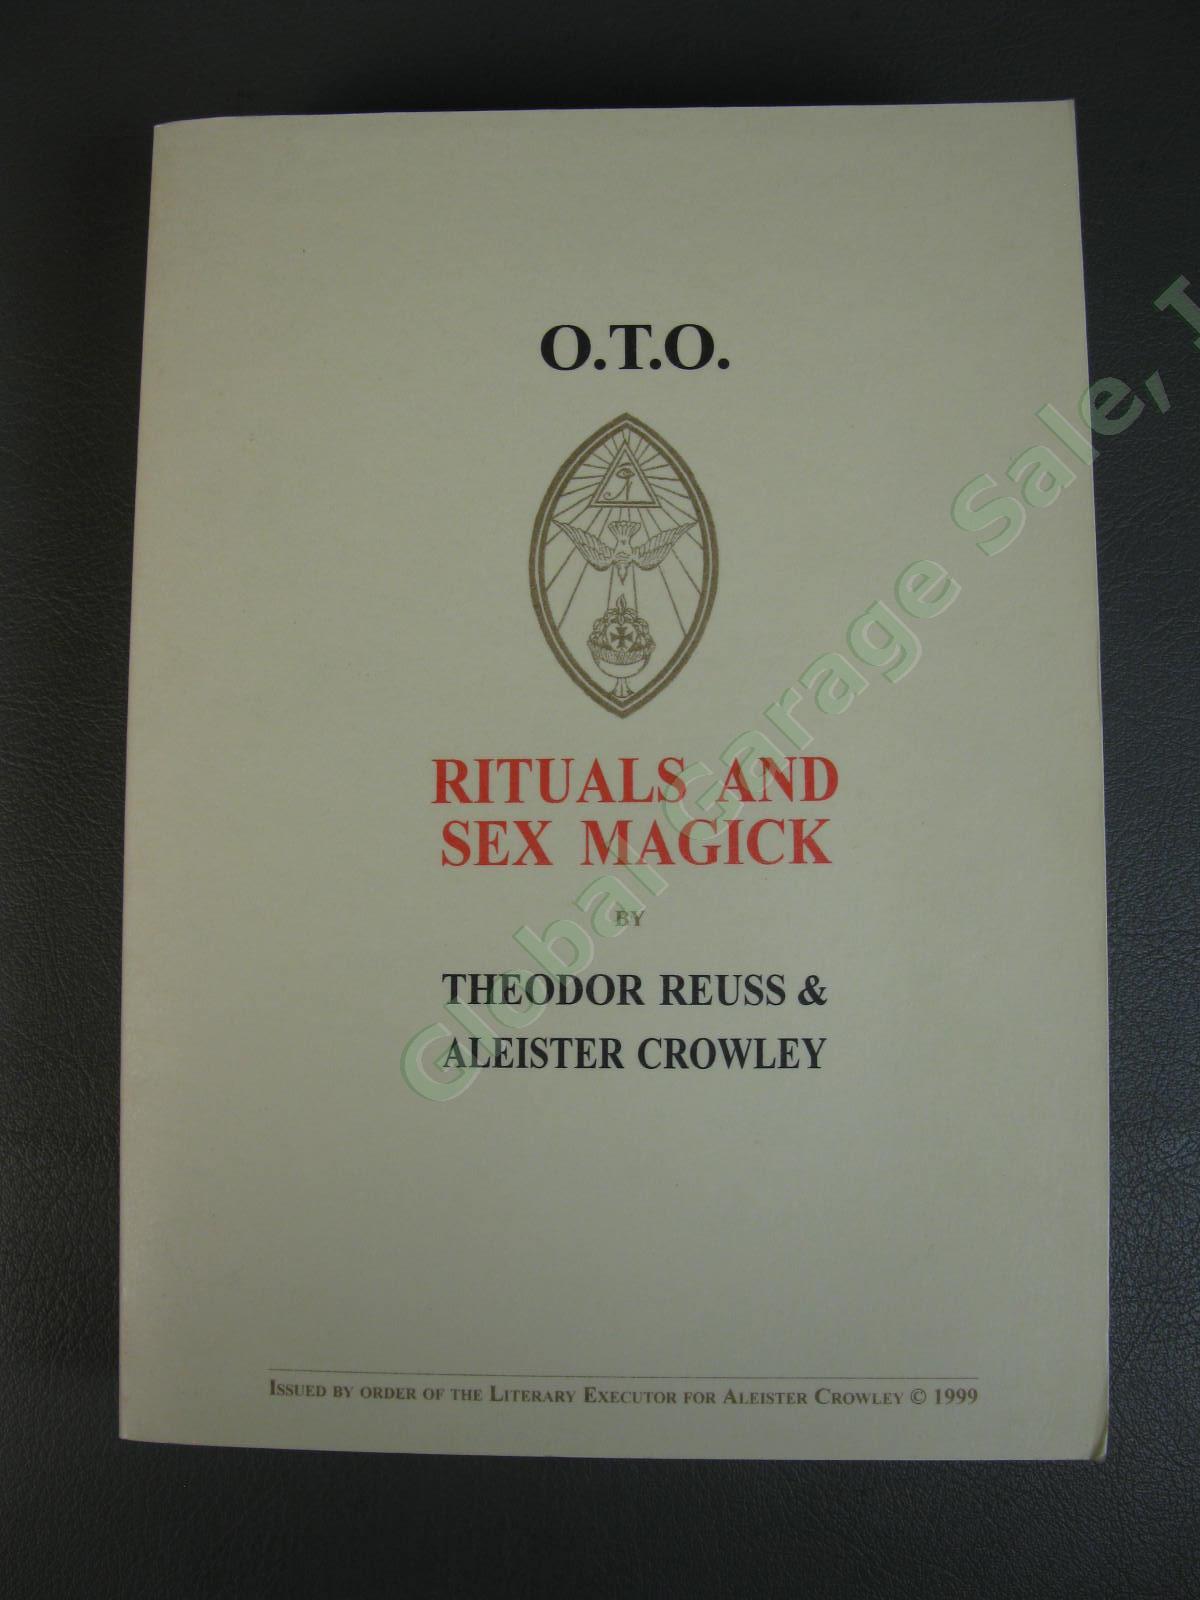 RARE 1st Ed 1999 OTO Rituals and Sex Magick Aleister Crowley Reuss OCCULT OOP NR